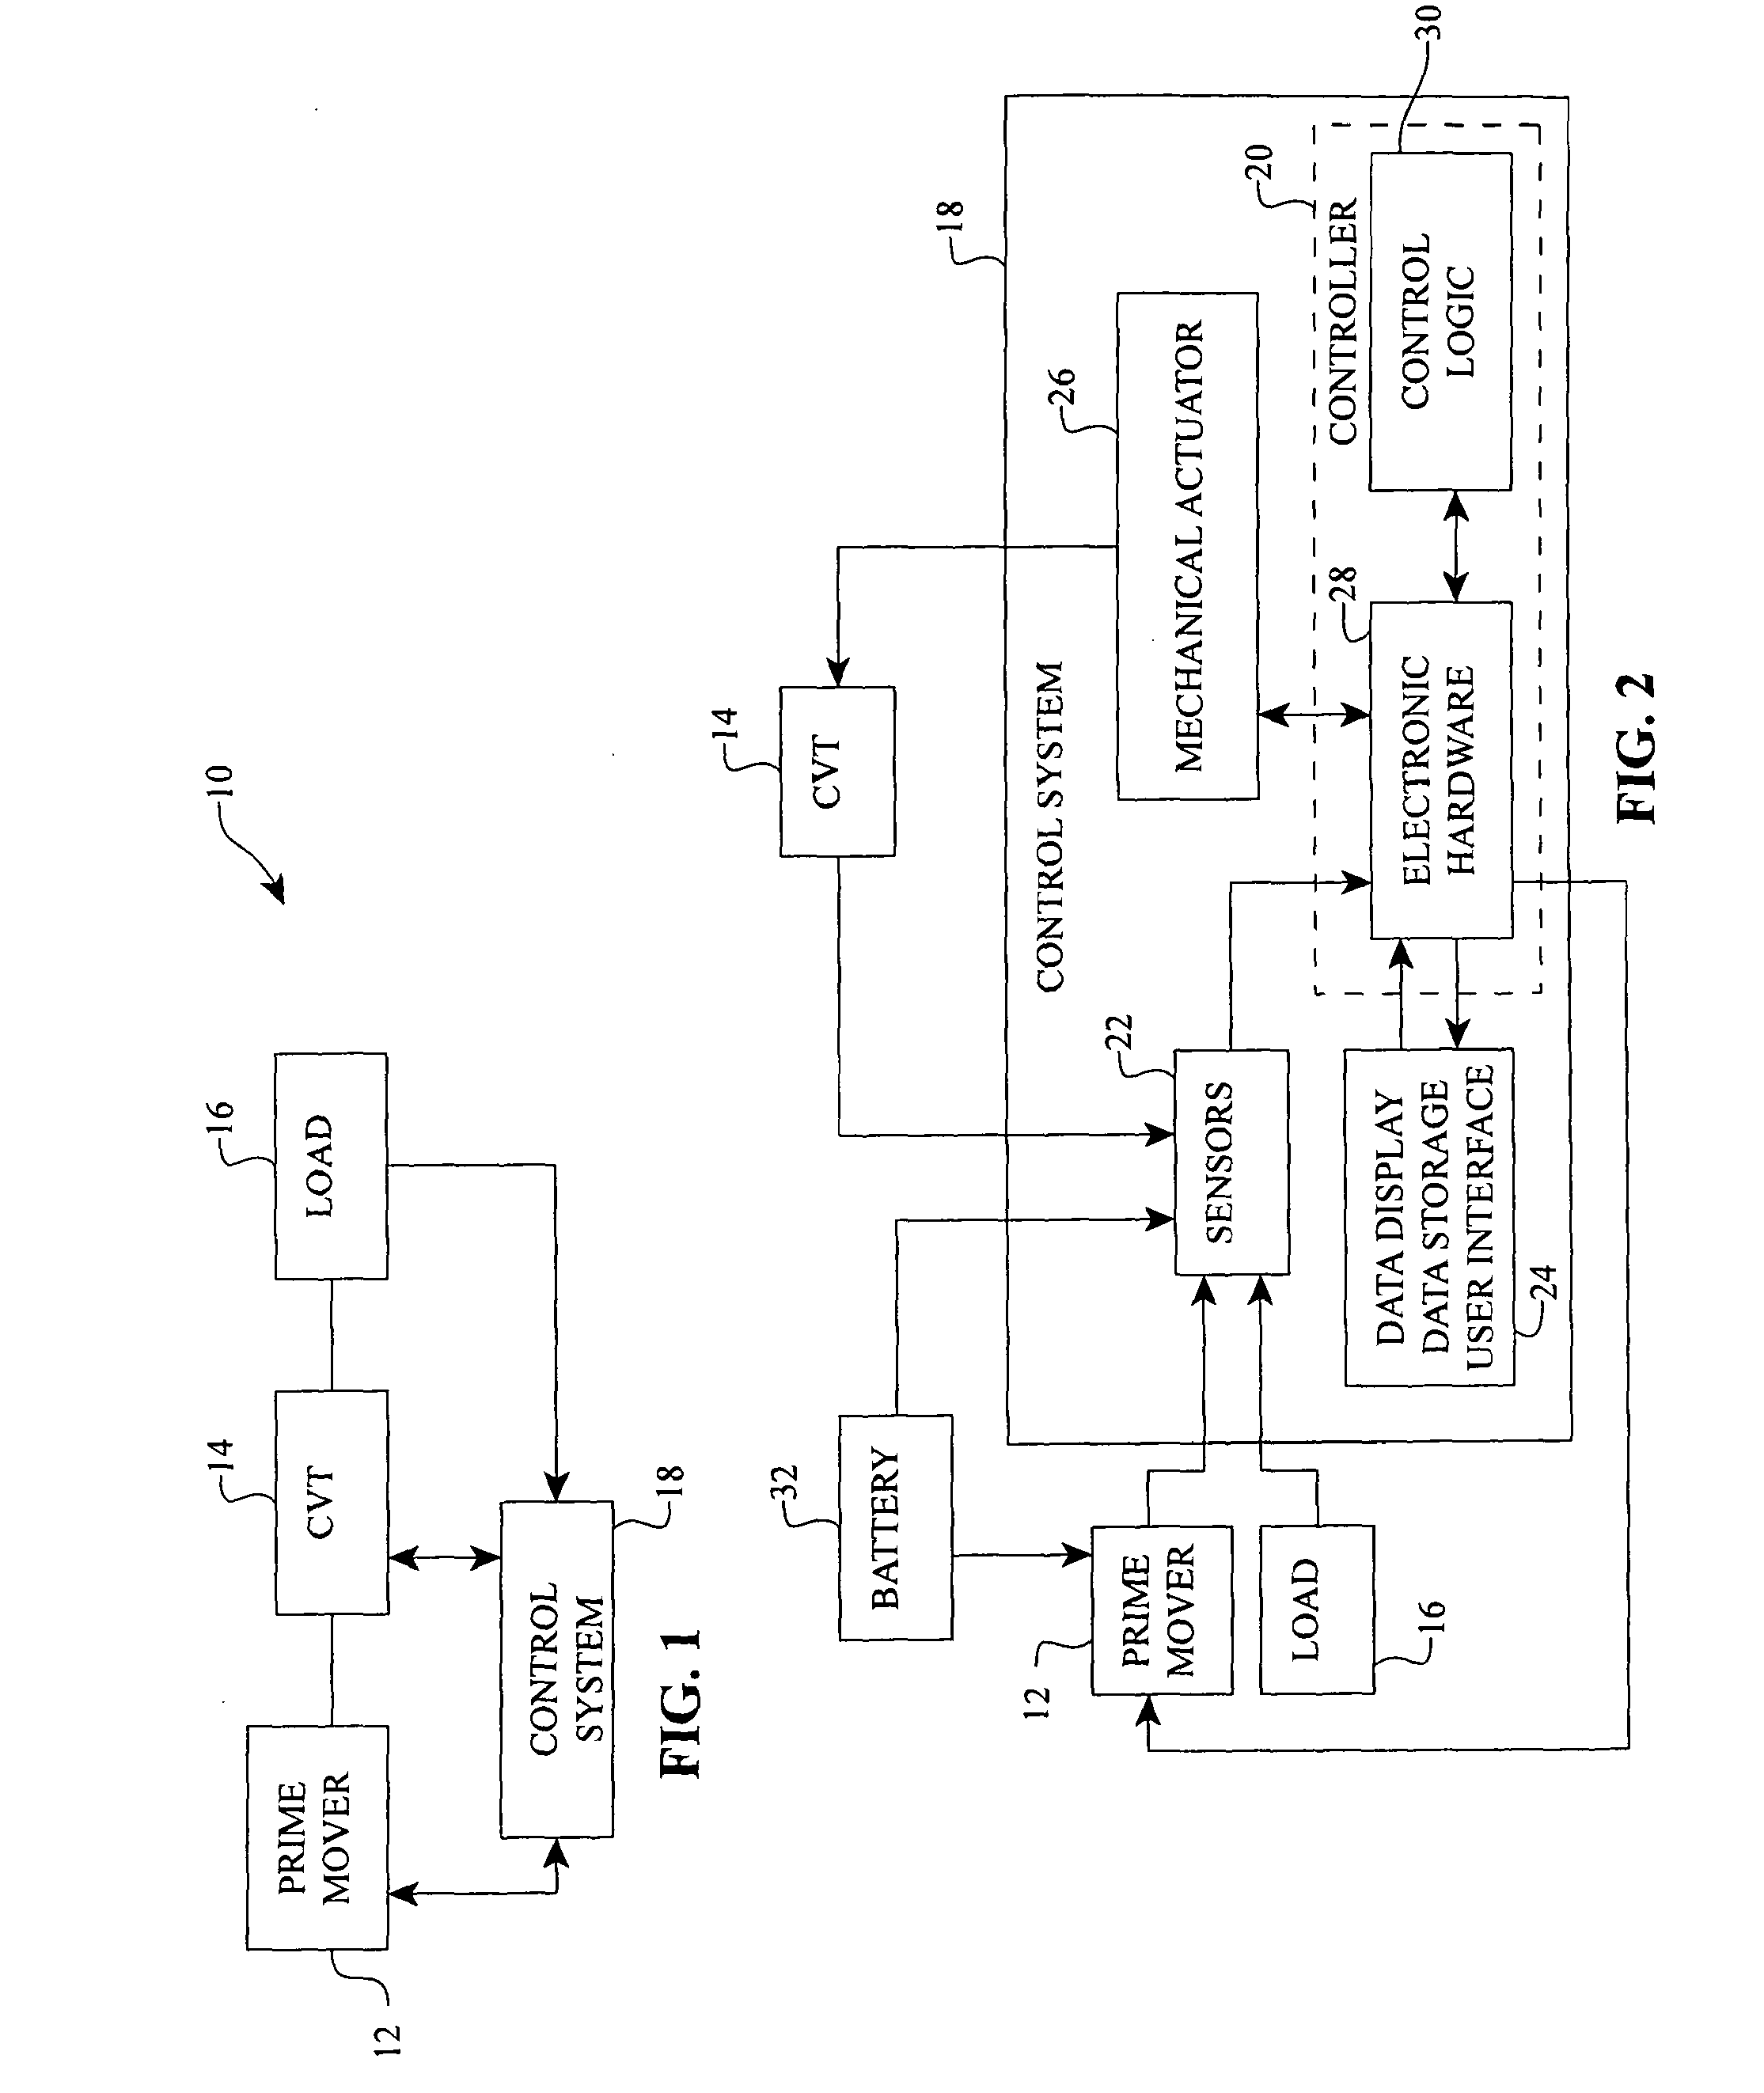 Systems and methods for control of transmission and/or prime mover